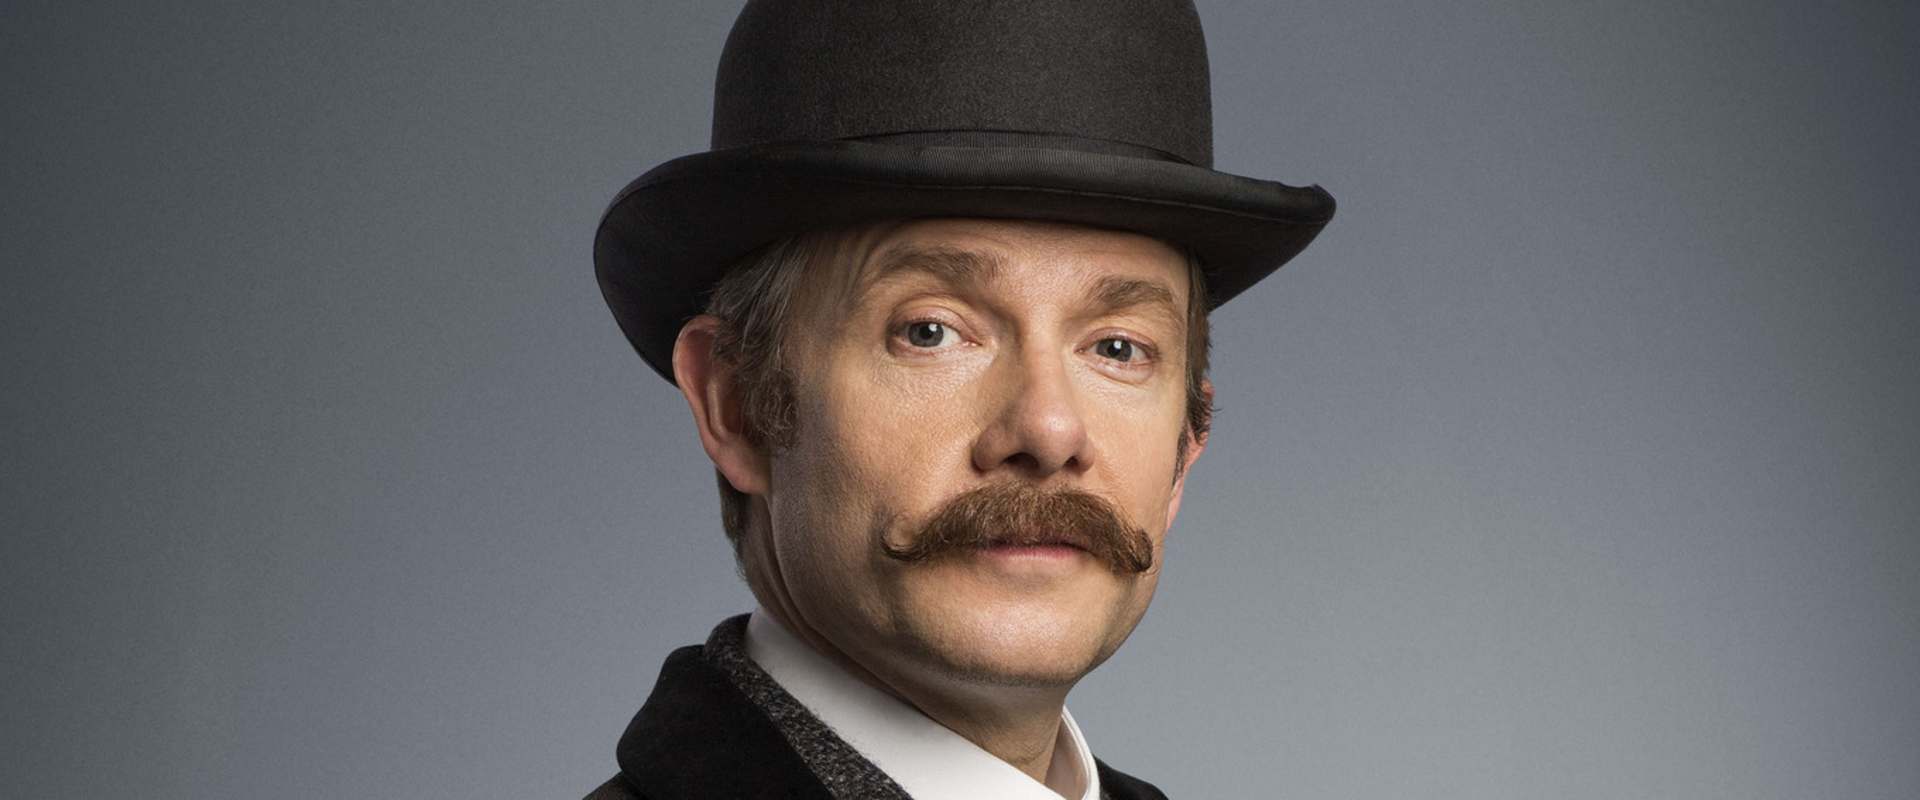 how to watch sherlock the abominable bride on tv